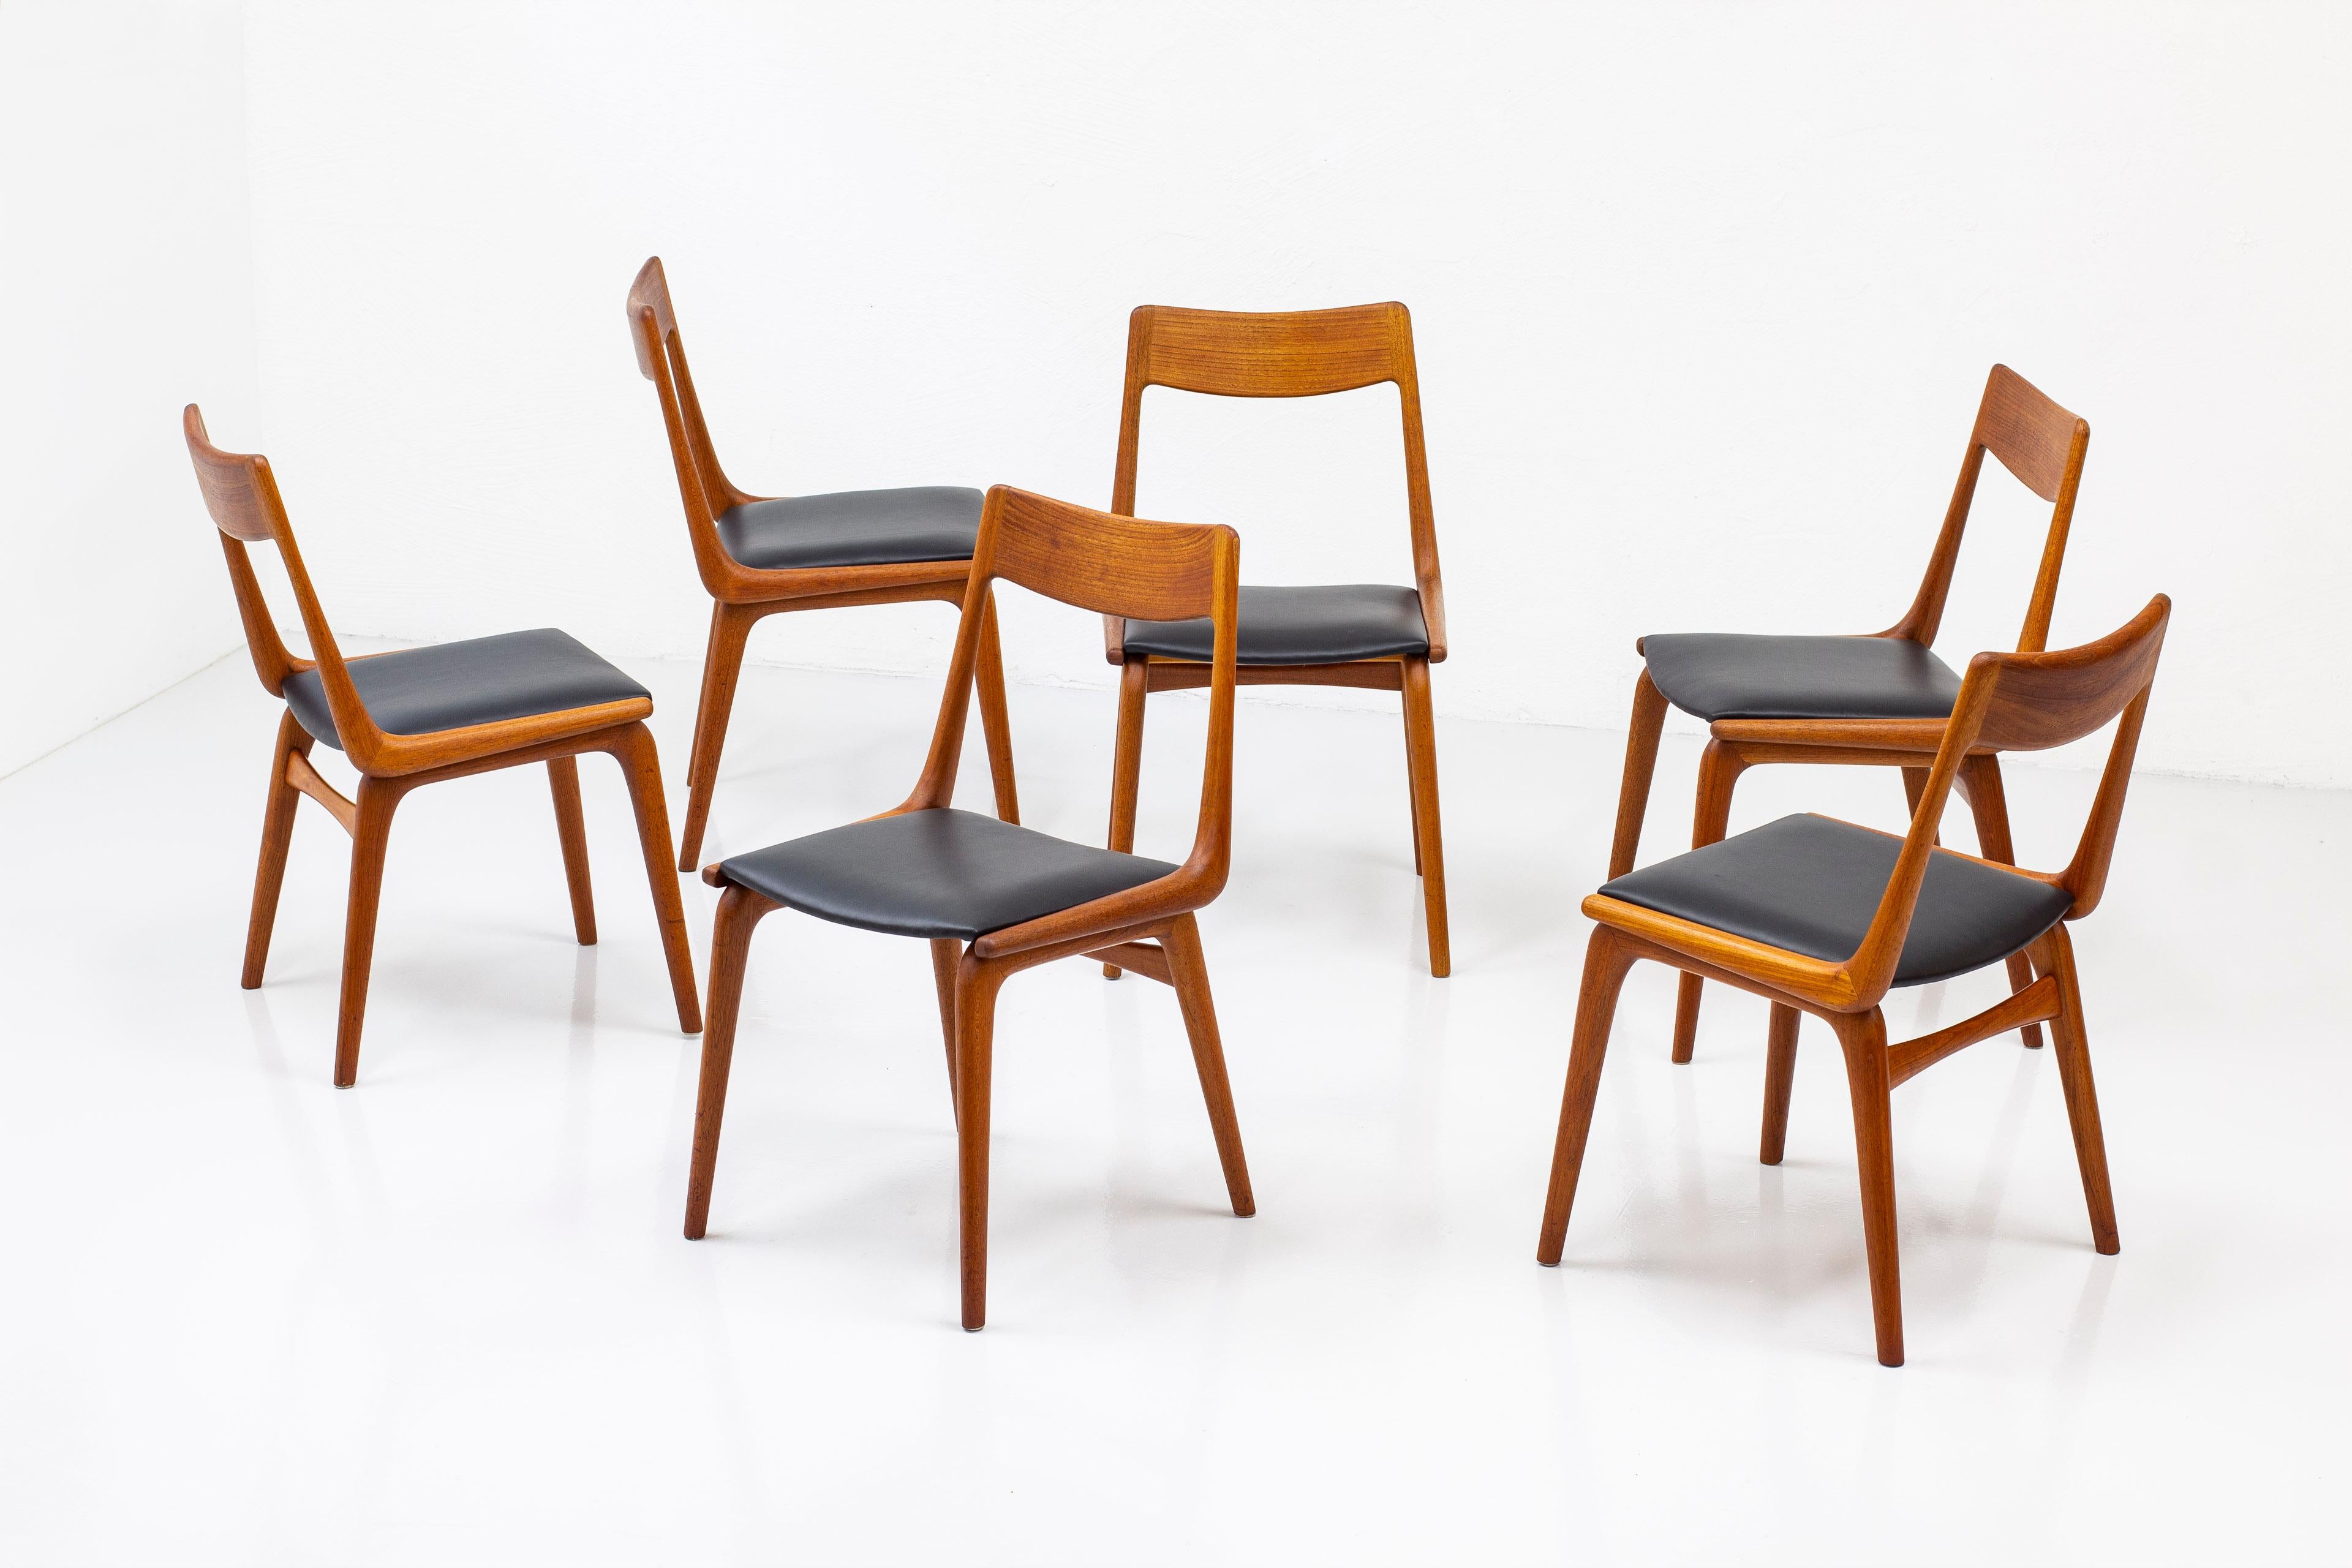 Set of six chairs by Alfred Christensen. Produced by Slagelse Möbelverk in Denmark during the 1950s. Solid teak fram with new upholstery in black leather. Fully restored in excellent condition. Light age related patina due to age and use.

Price